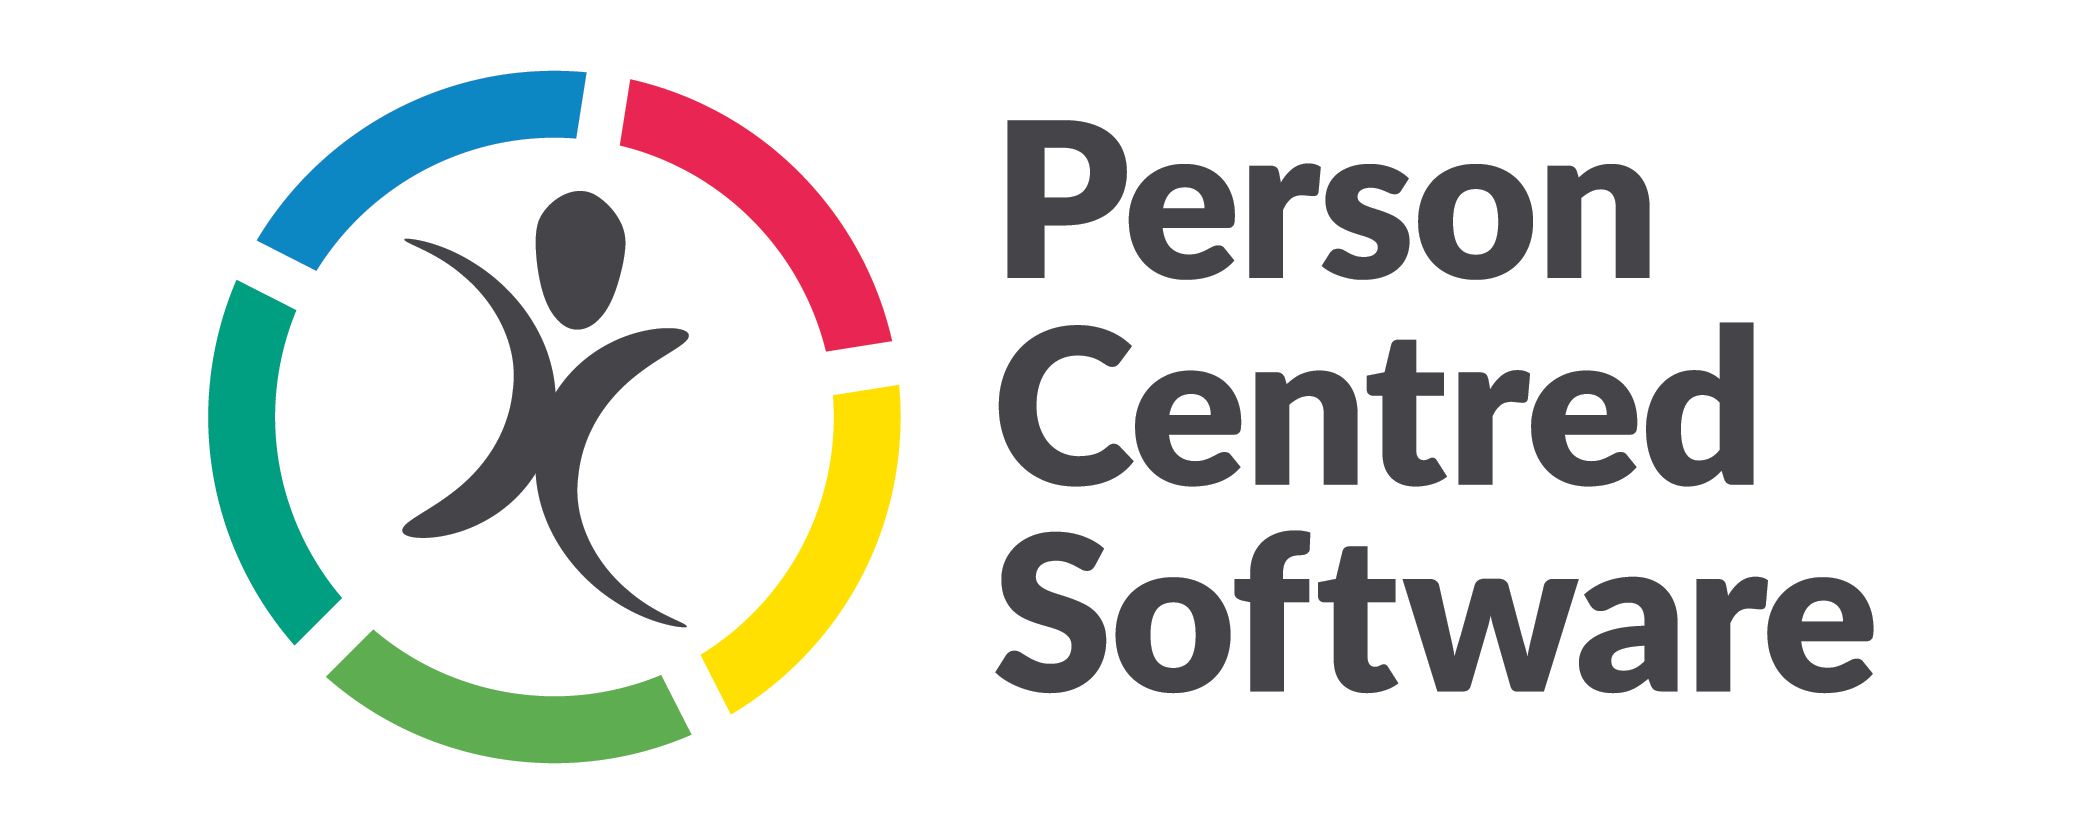 Person Centered Software